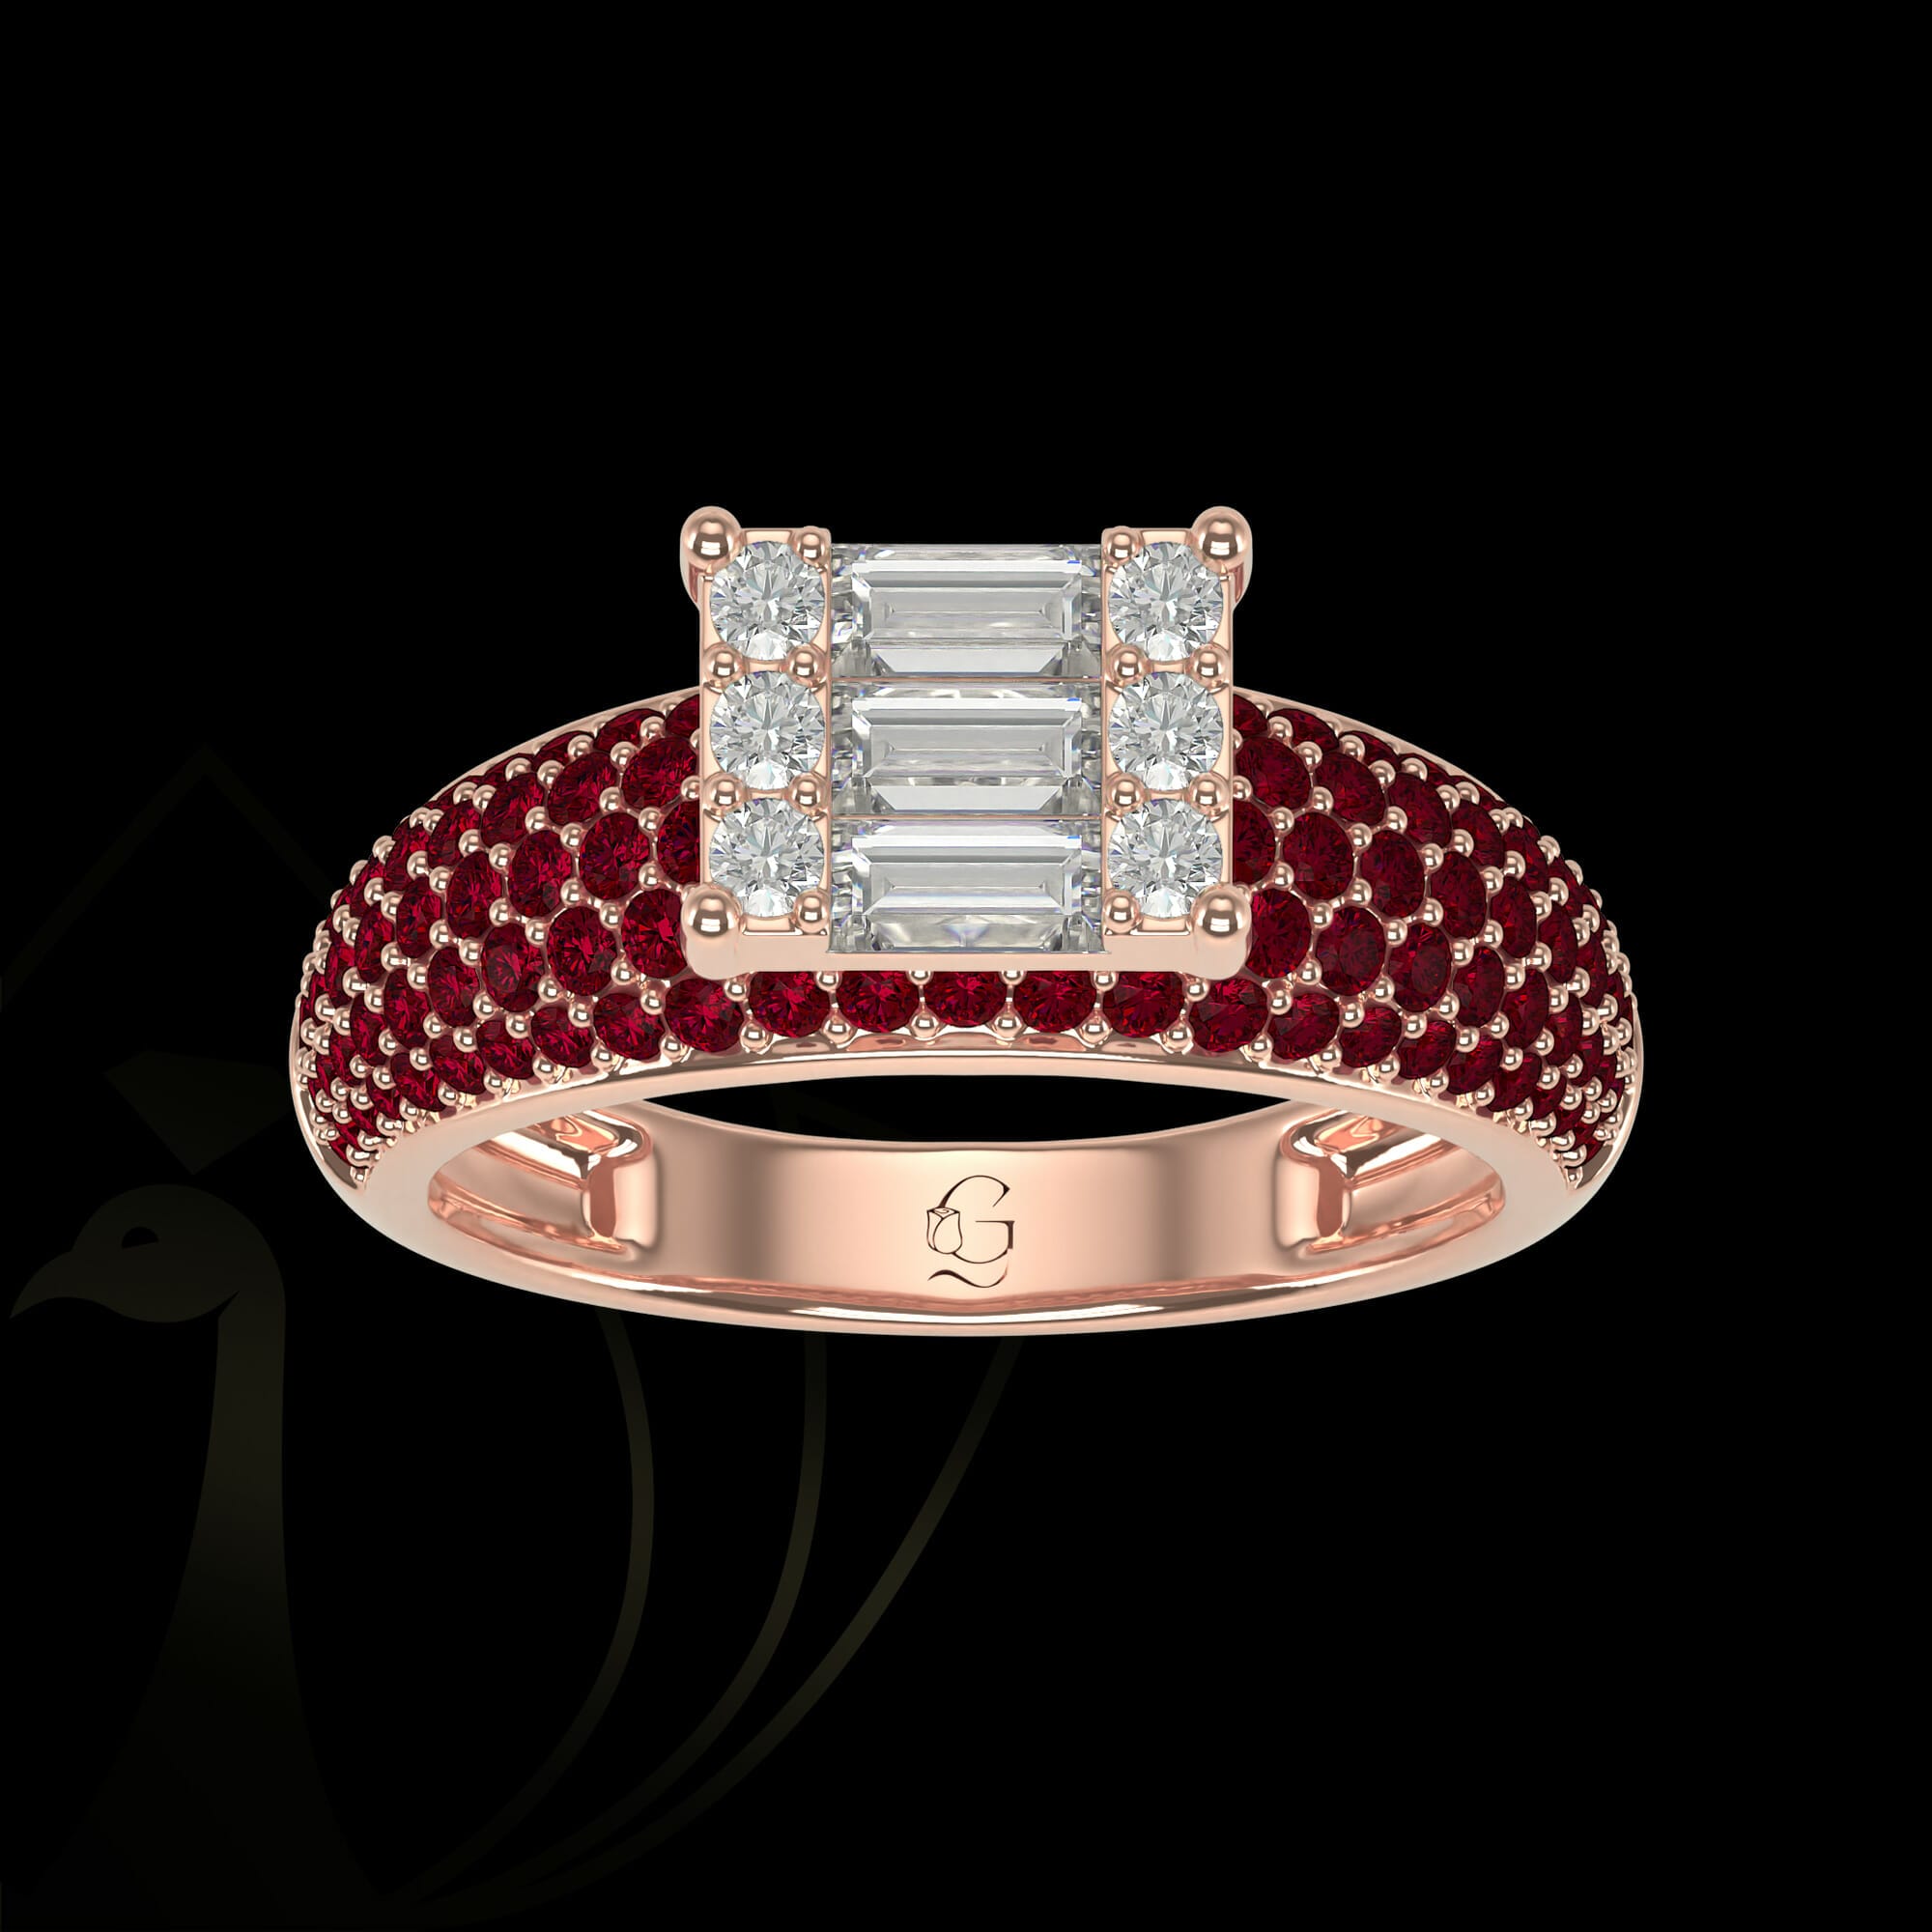 A diamond ring with emerald cut diamonds, a solitaire-look, and sparkling Swarovski Red gemstones.